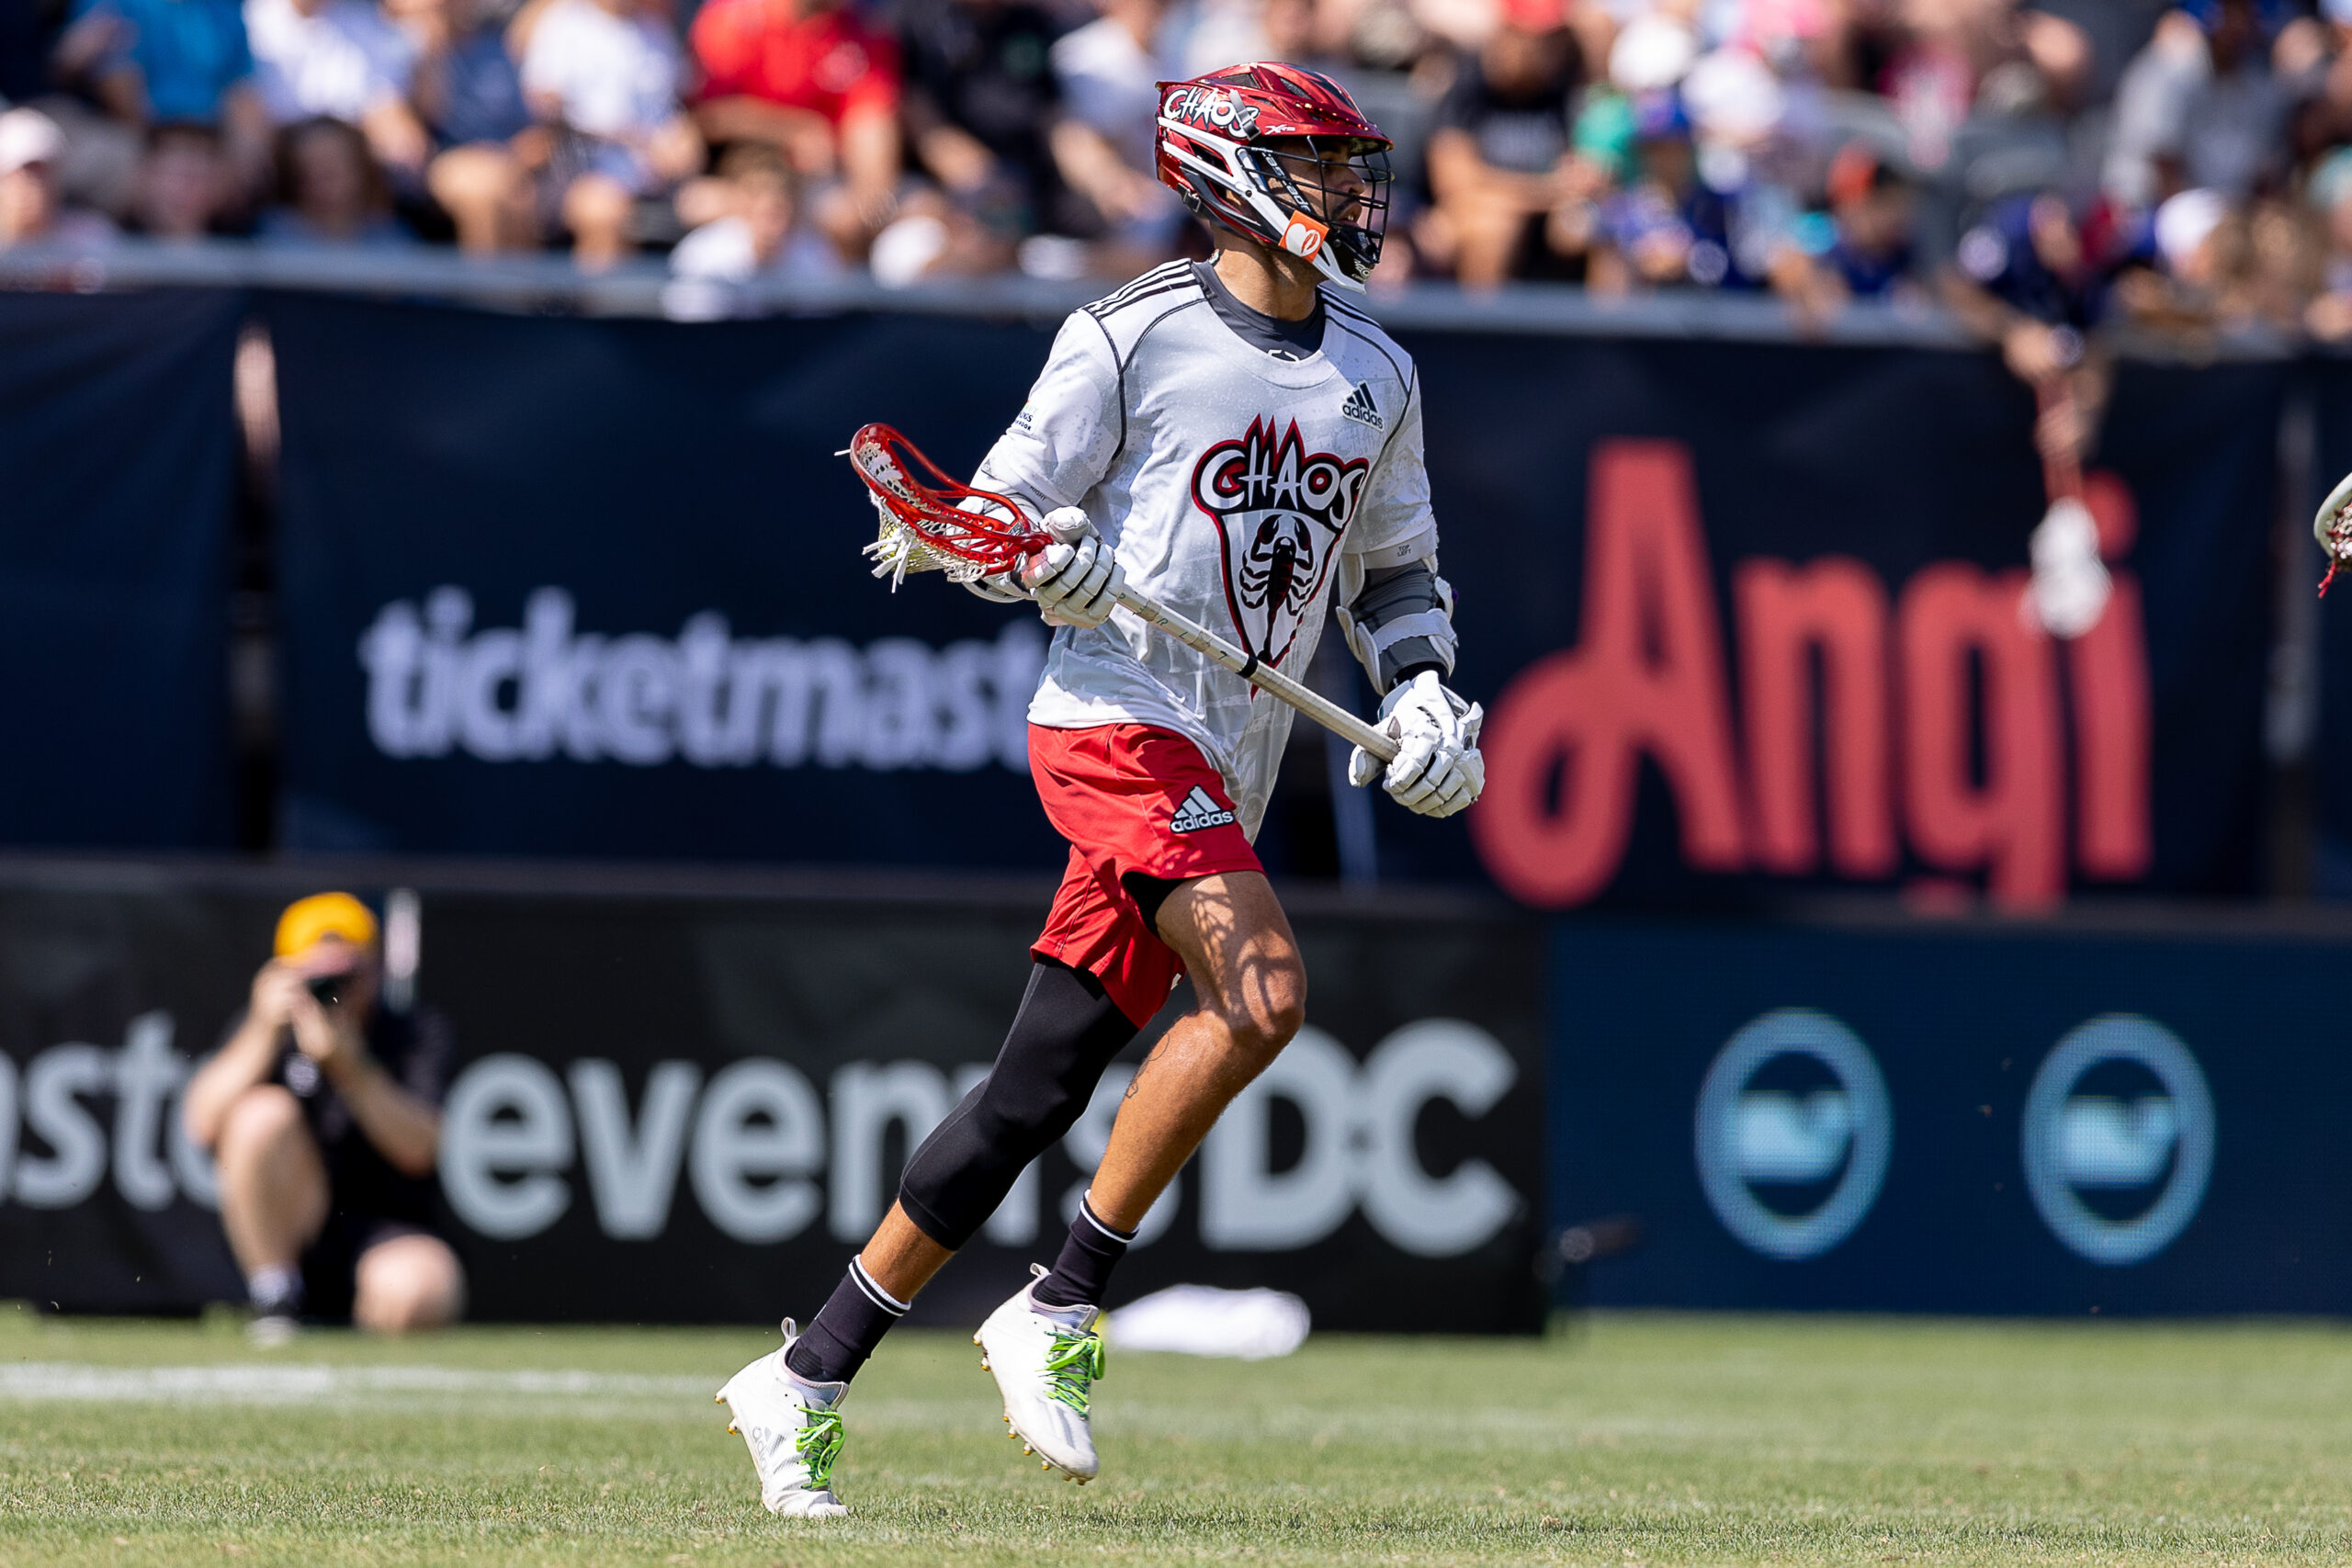 Premier Lacrosse League Betting Odds & Picks: PLL Bets for Archers vs. Chaos (Sunday, September 11) article feature image